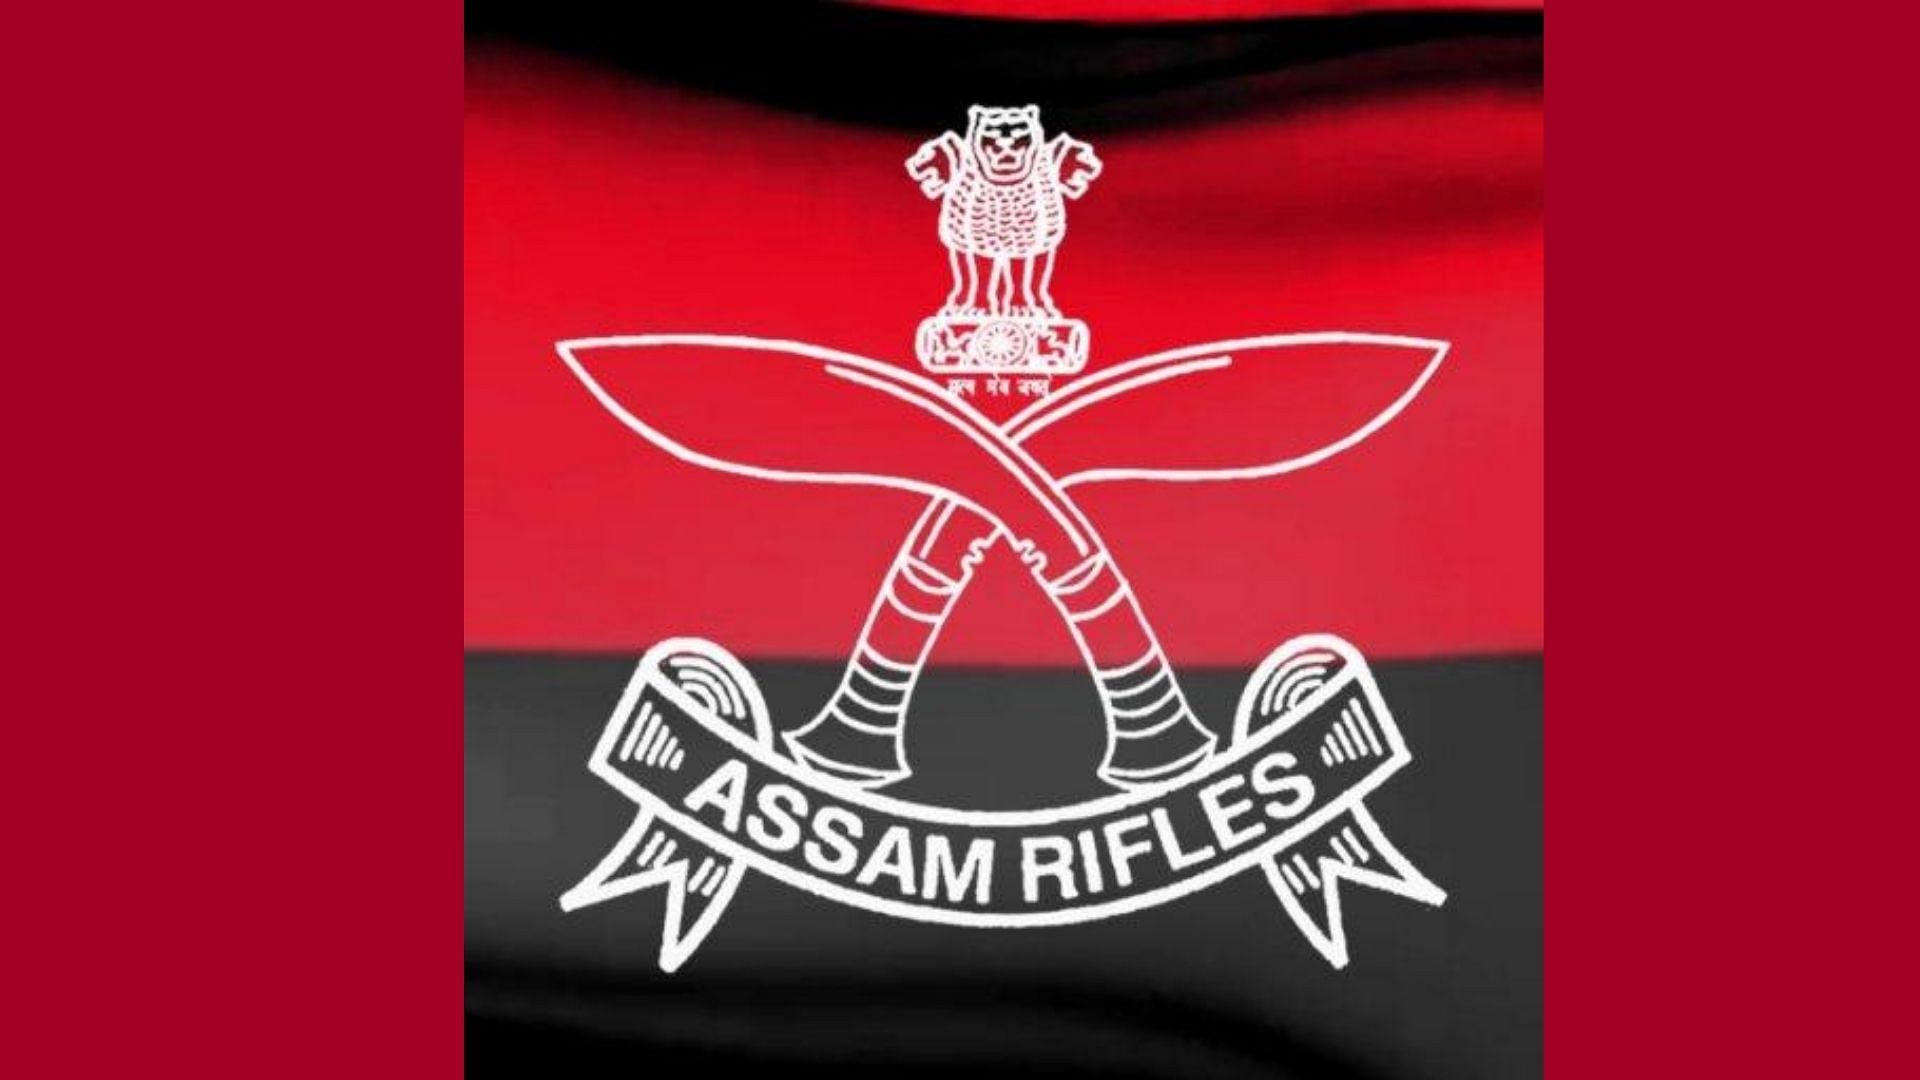 Three personnel from 4 Assam Rifles unit lost their lives and four were injured in an ambush by terrorists from the local group People’s Liberation Army in Chandel